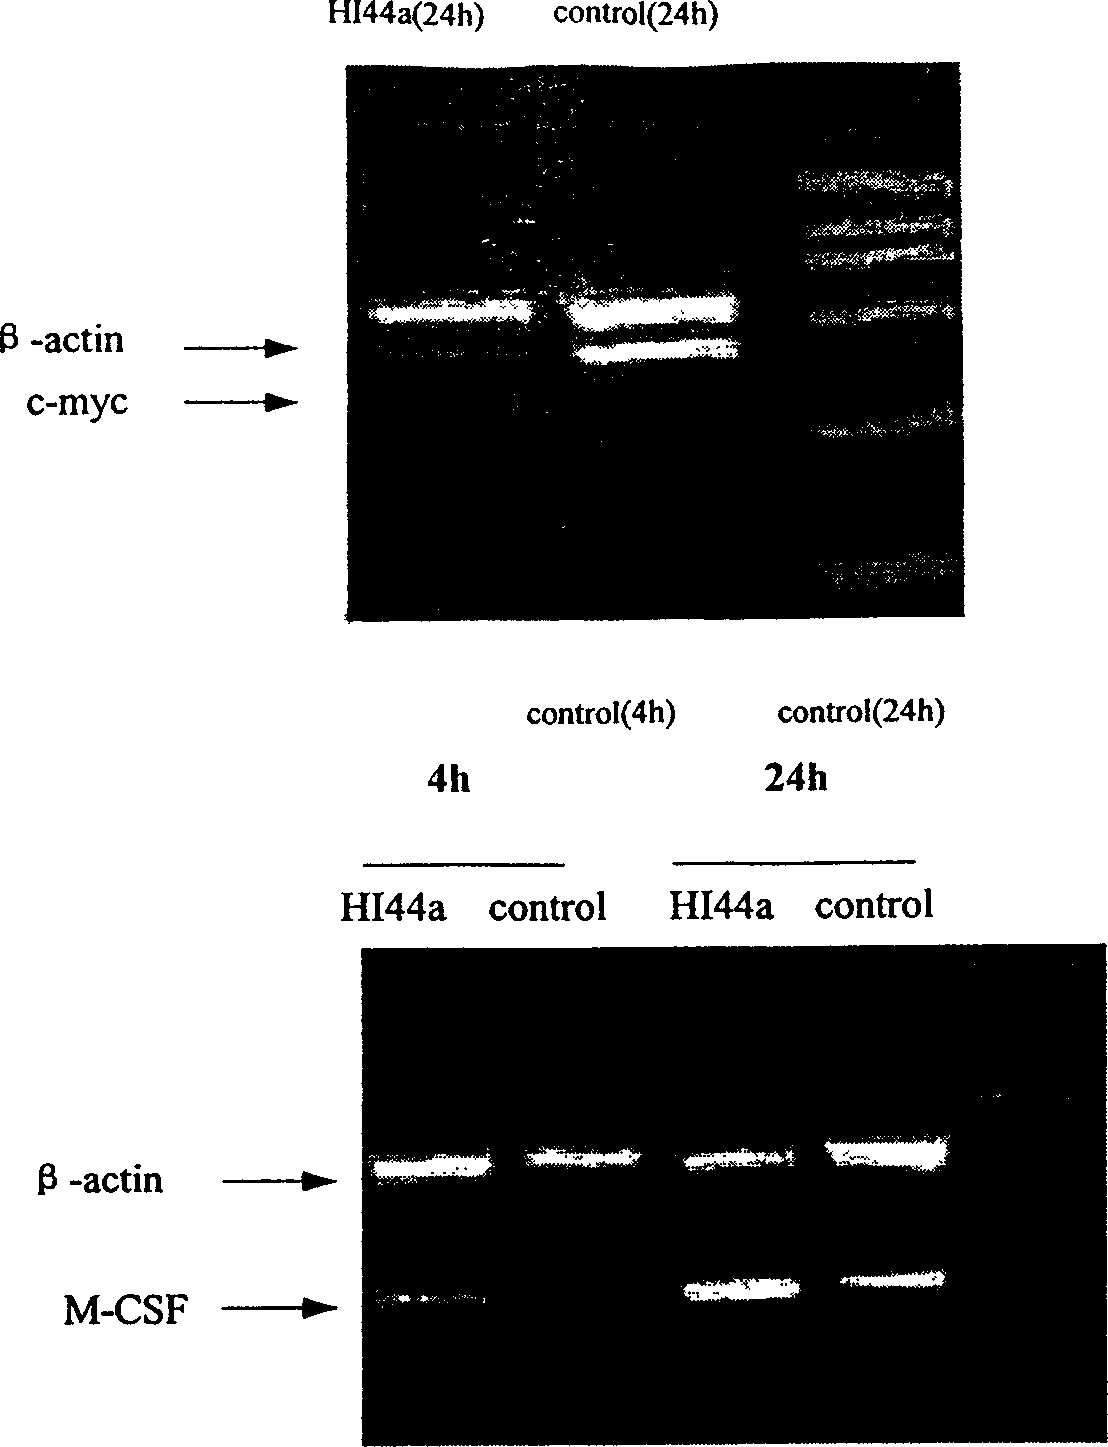 Engineering antibody against CD44 for inducing leukemia cell differentation and necrosis